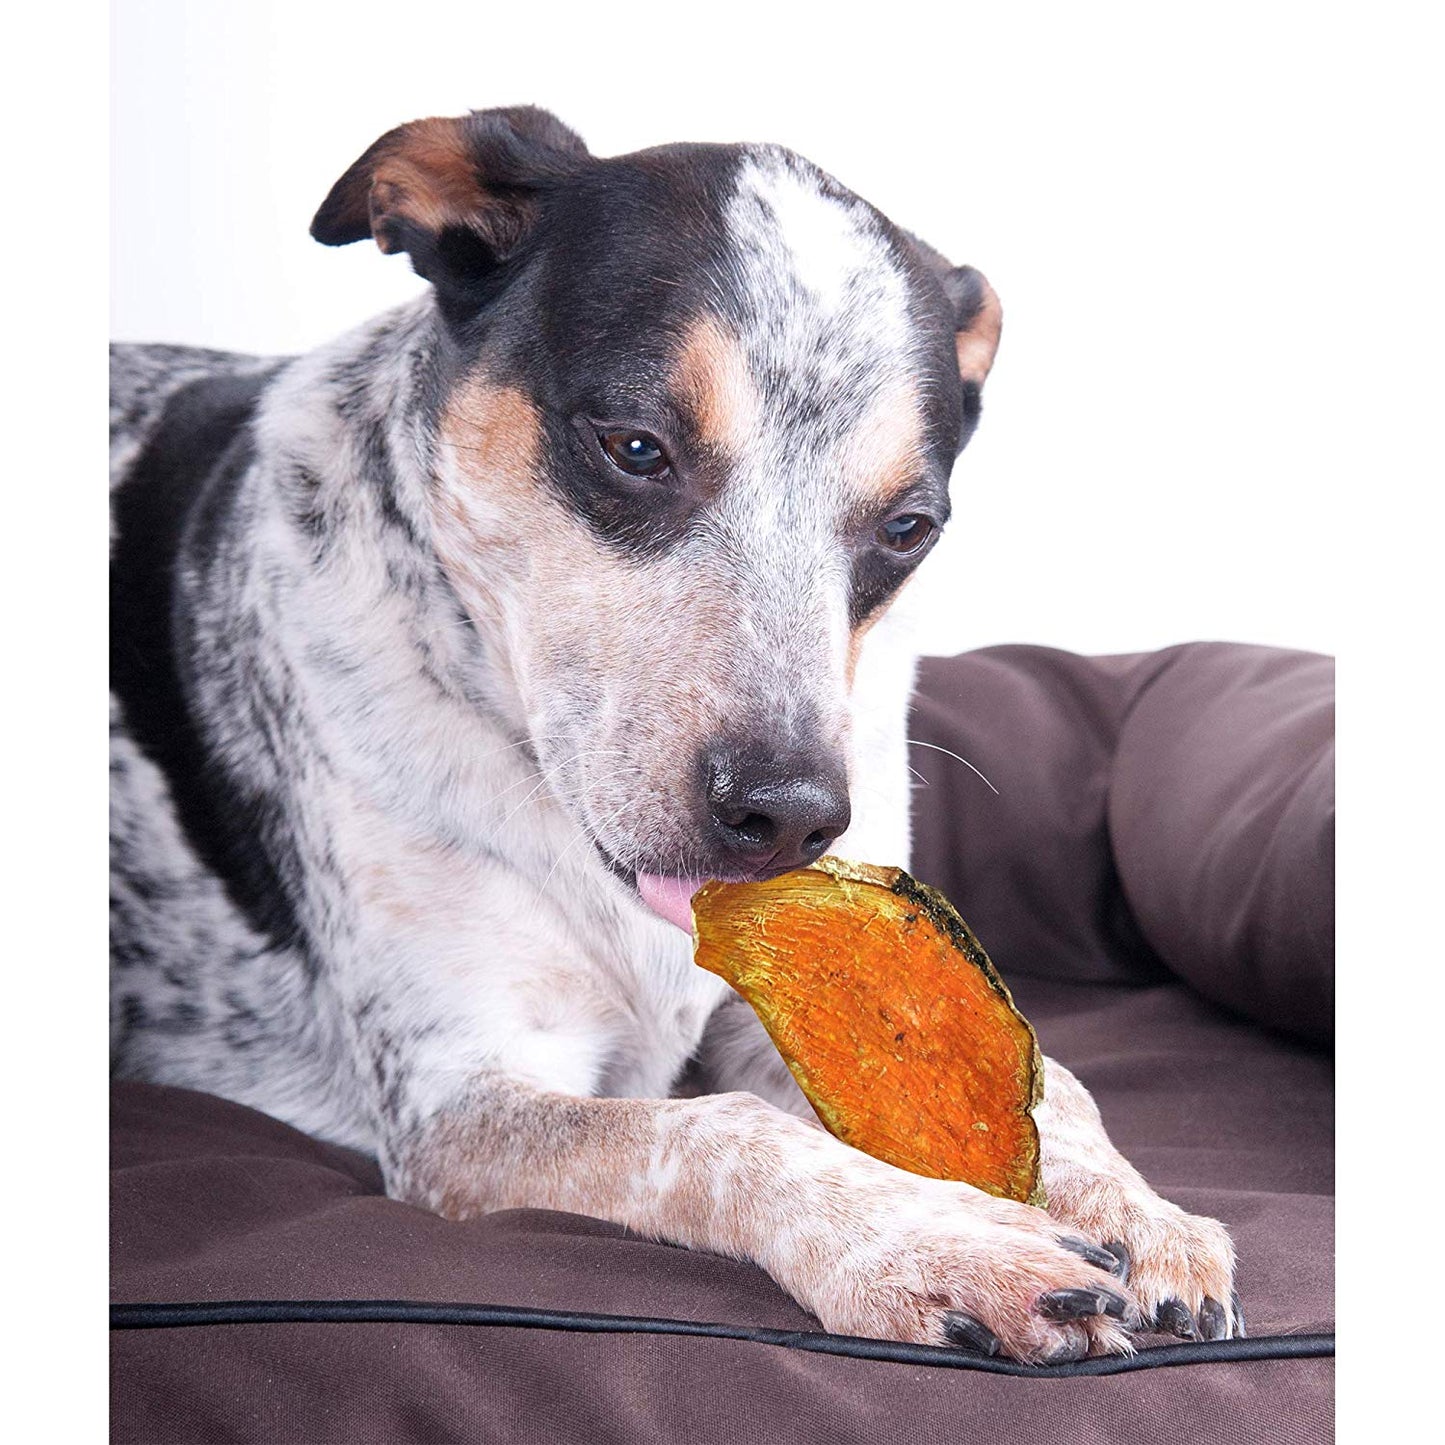 Dehydrated Sweet Potato Dog Treats - Made in USA, Single Ingredient, All Natural